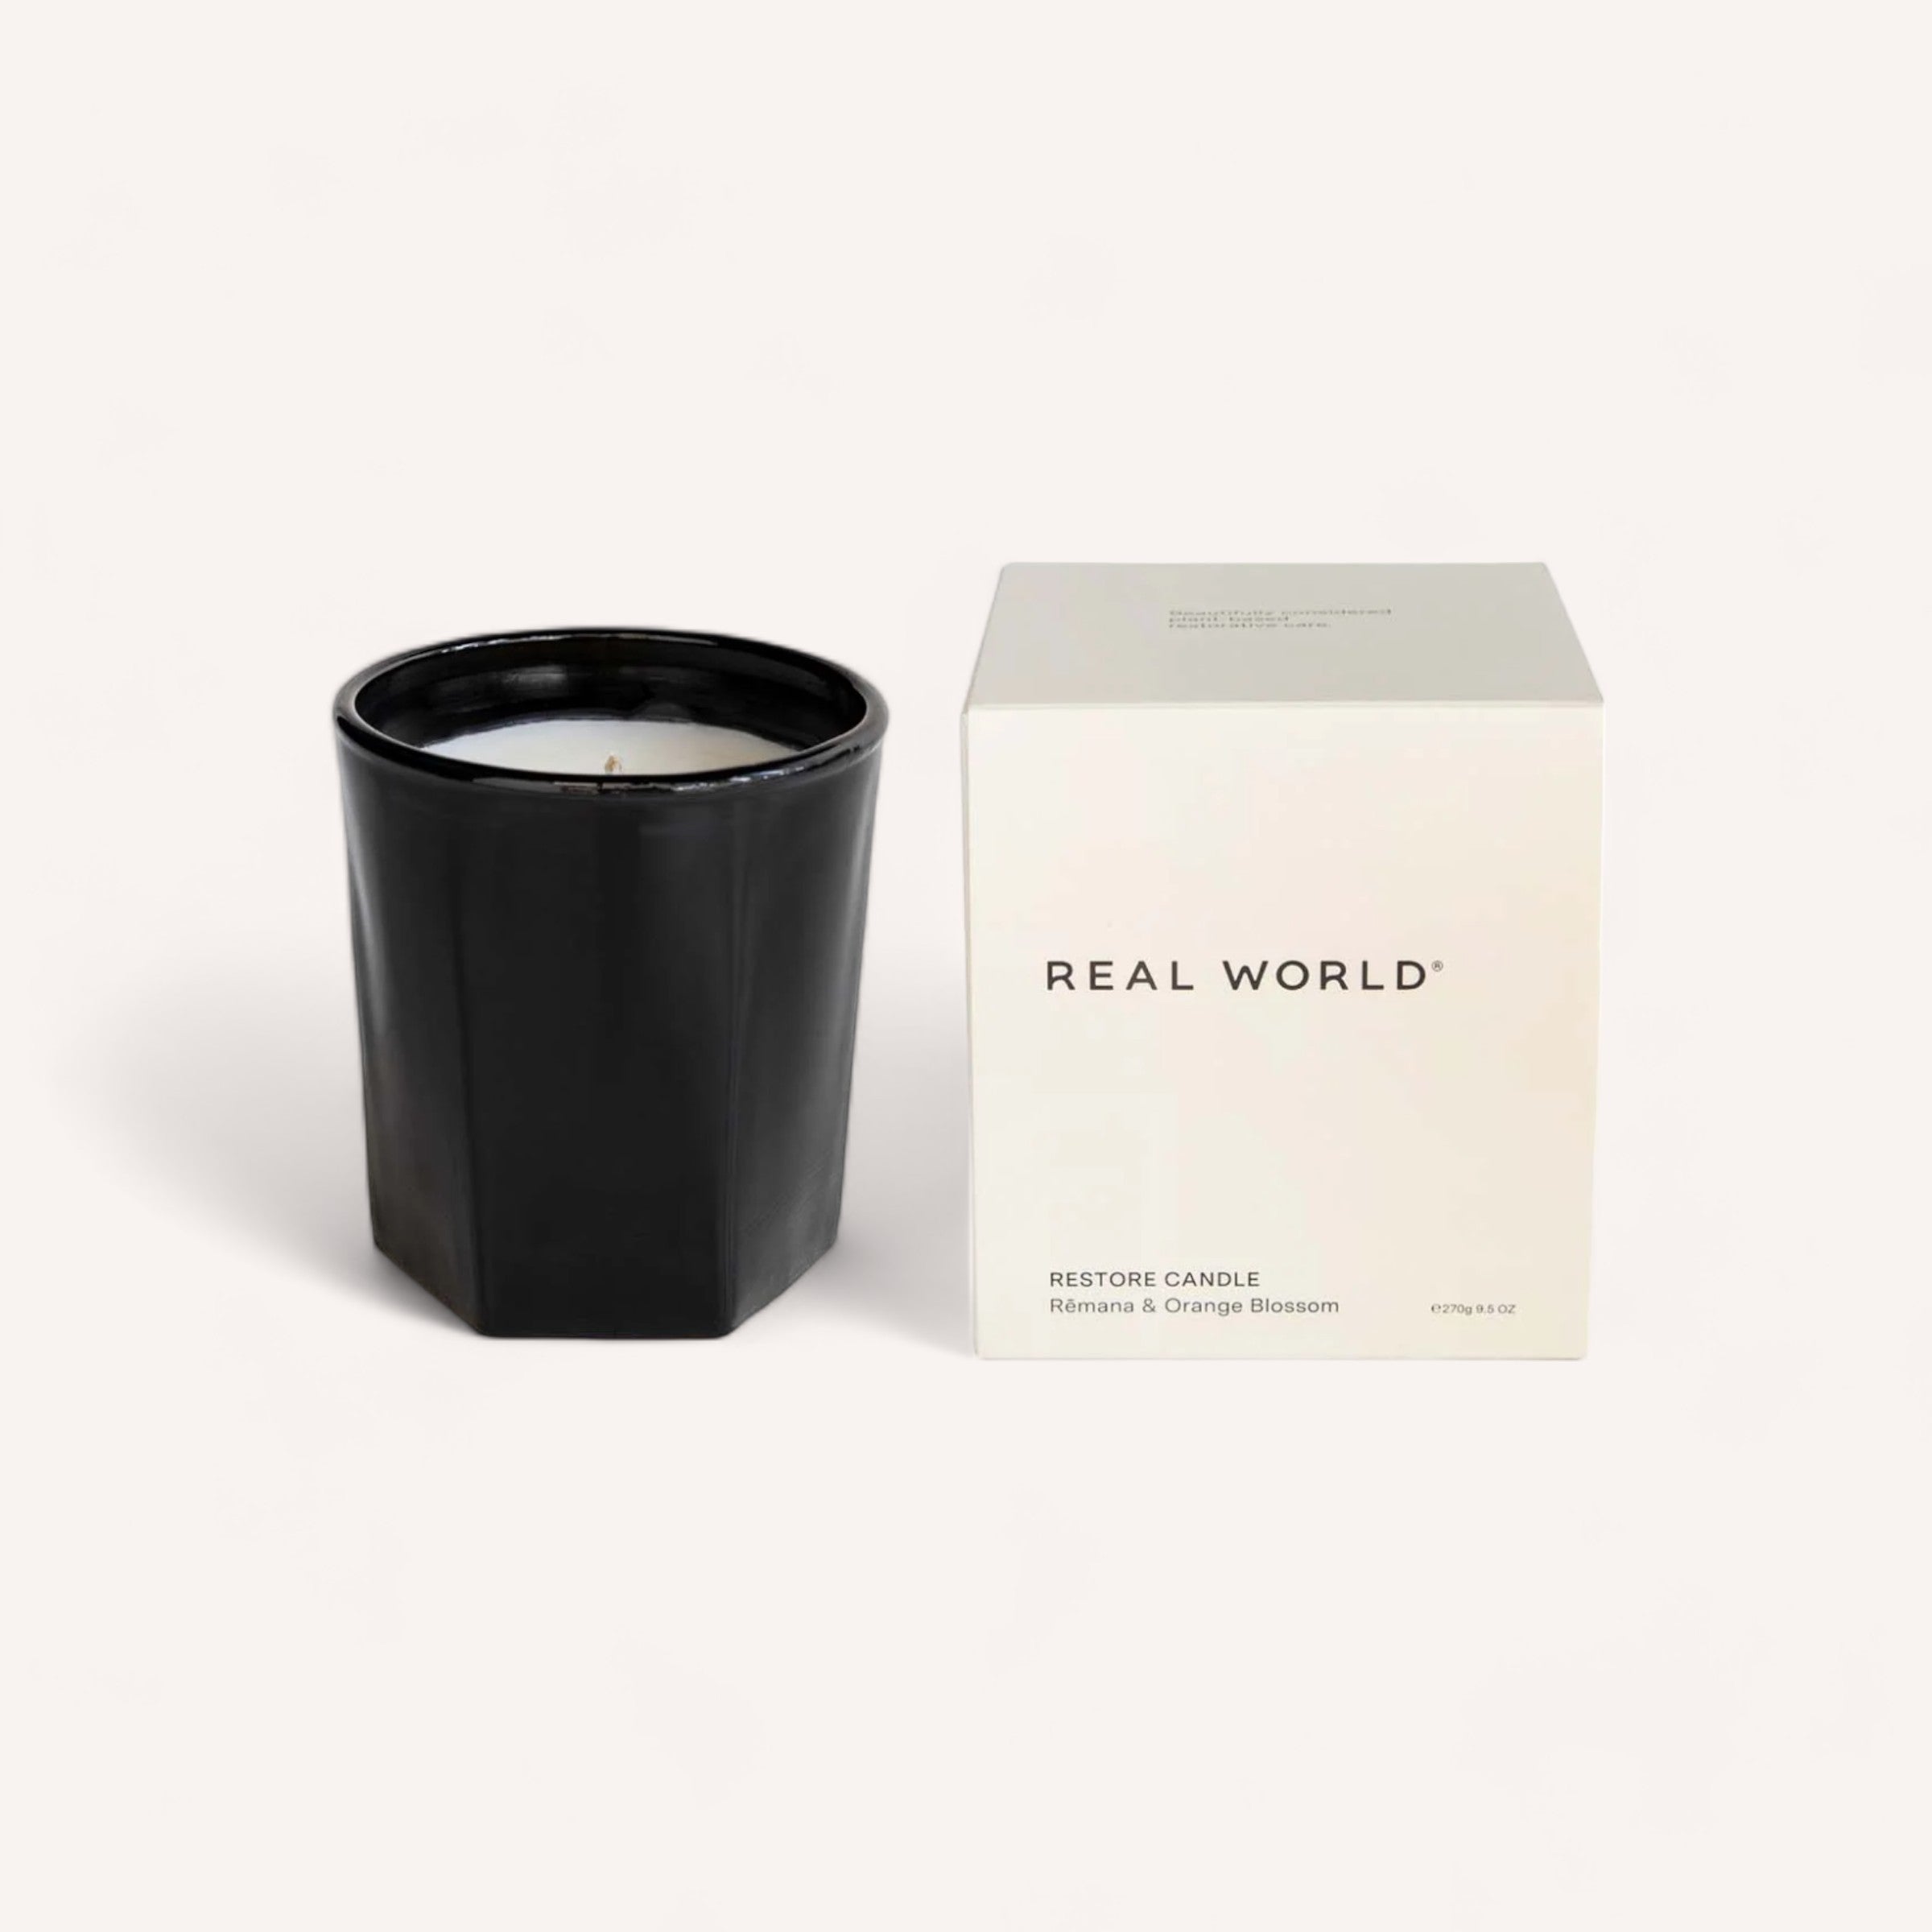 Elegant black handcrafted Remana & Orange Blossom Candle next to its minimalist packaging with the scent description "restore candle rosemary & orange blossom" from the brand Real World.